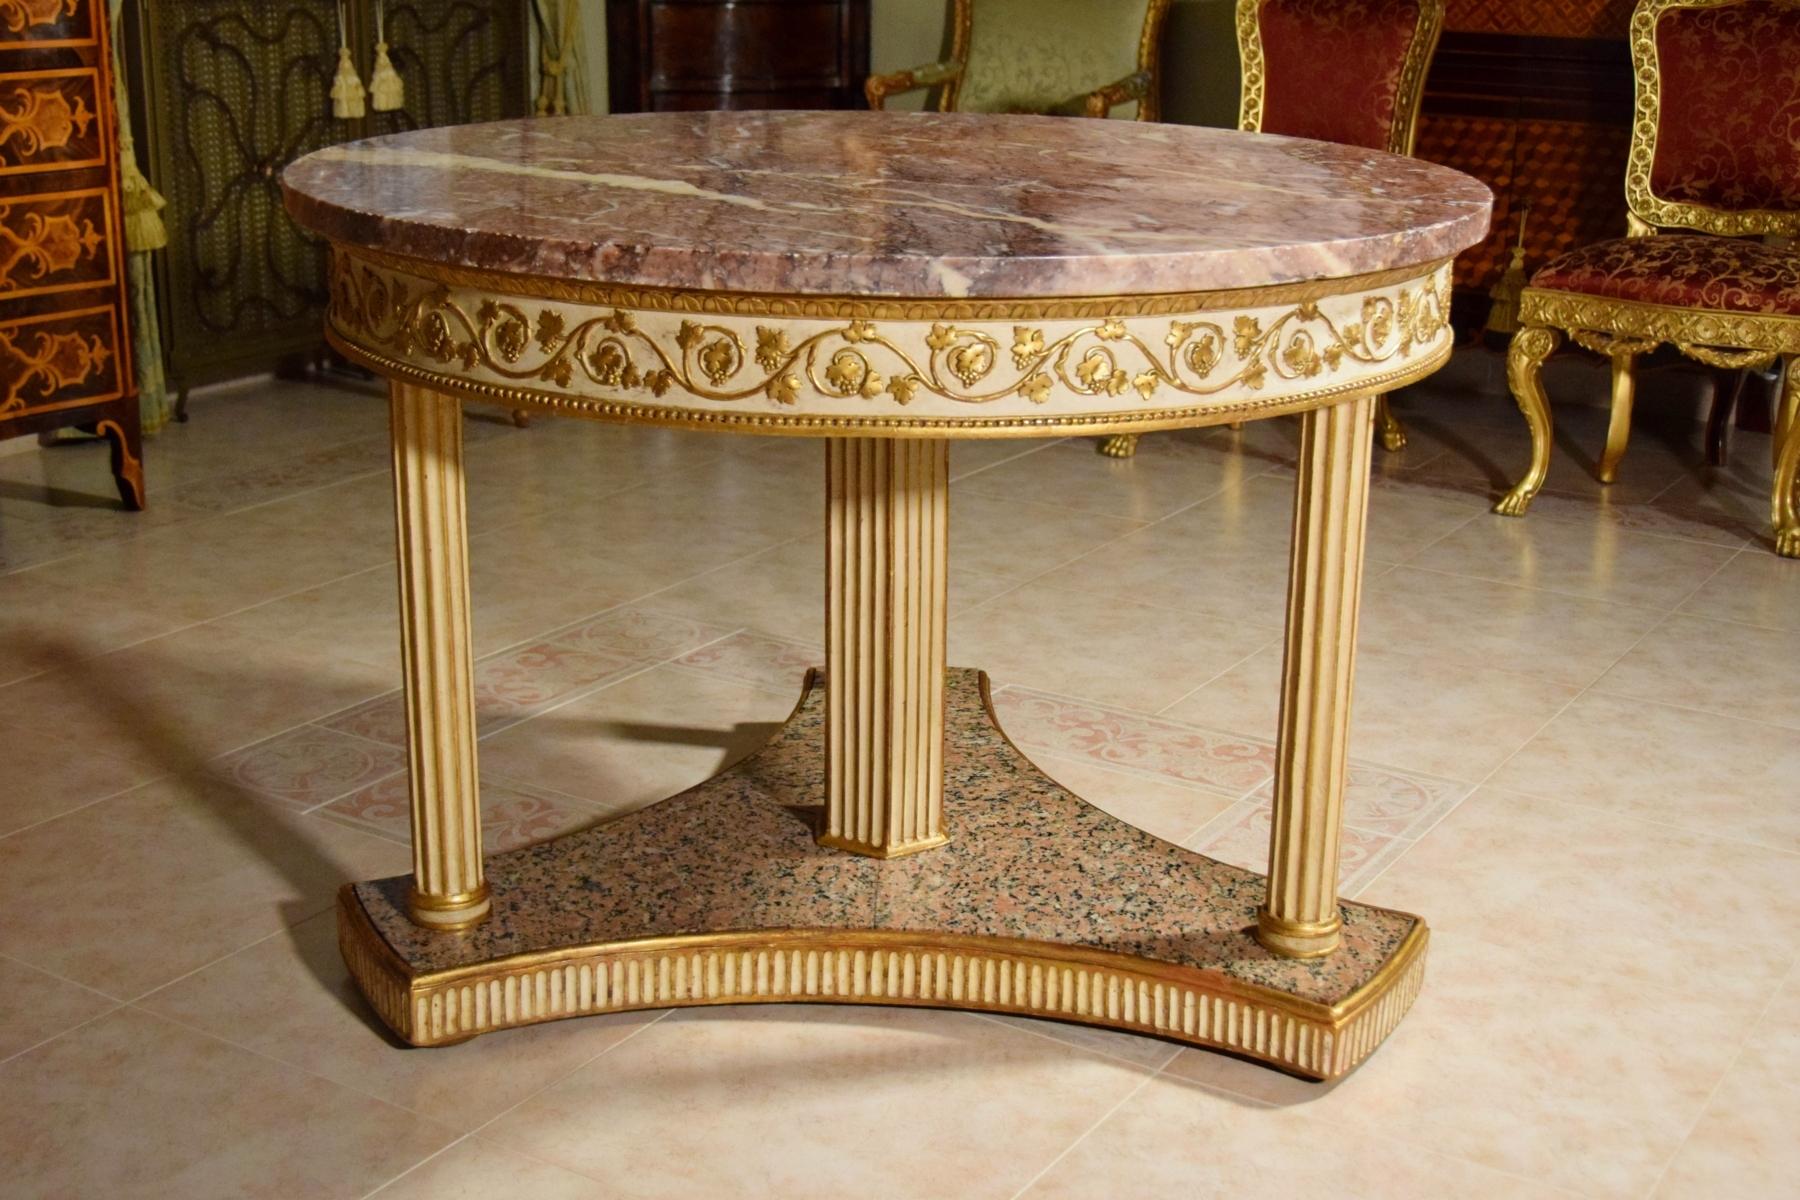 18th Century, Italian Neoclassical Round Lacquered Wood Center Table 3